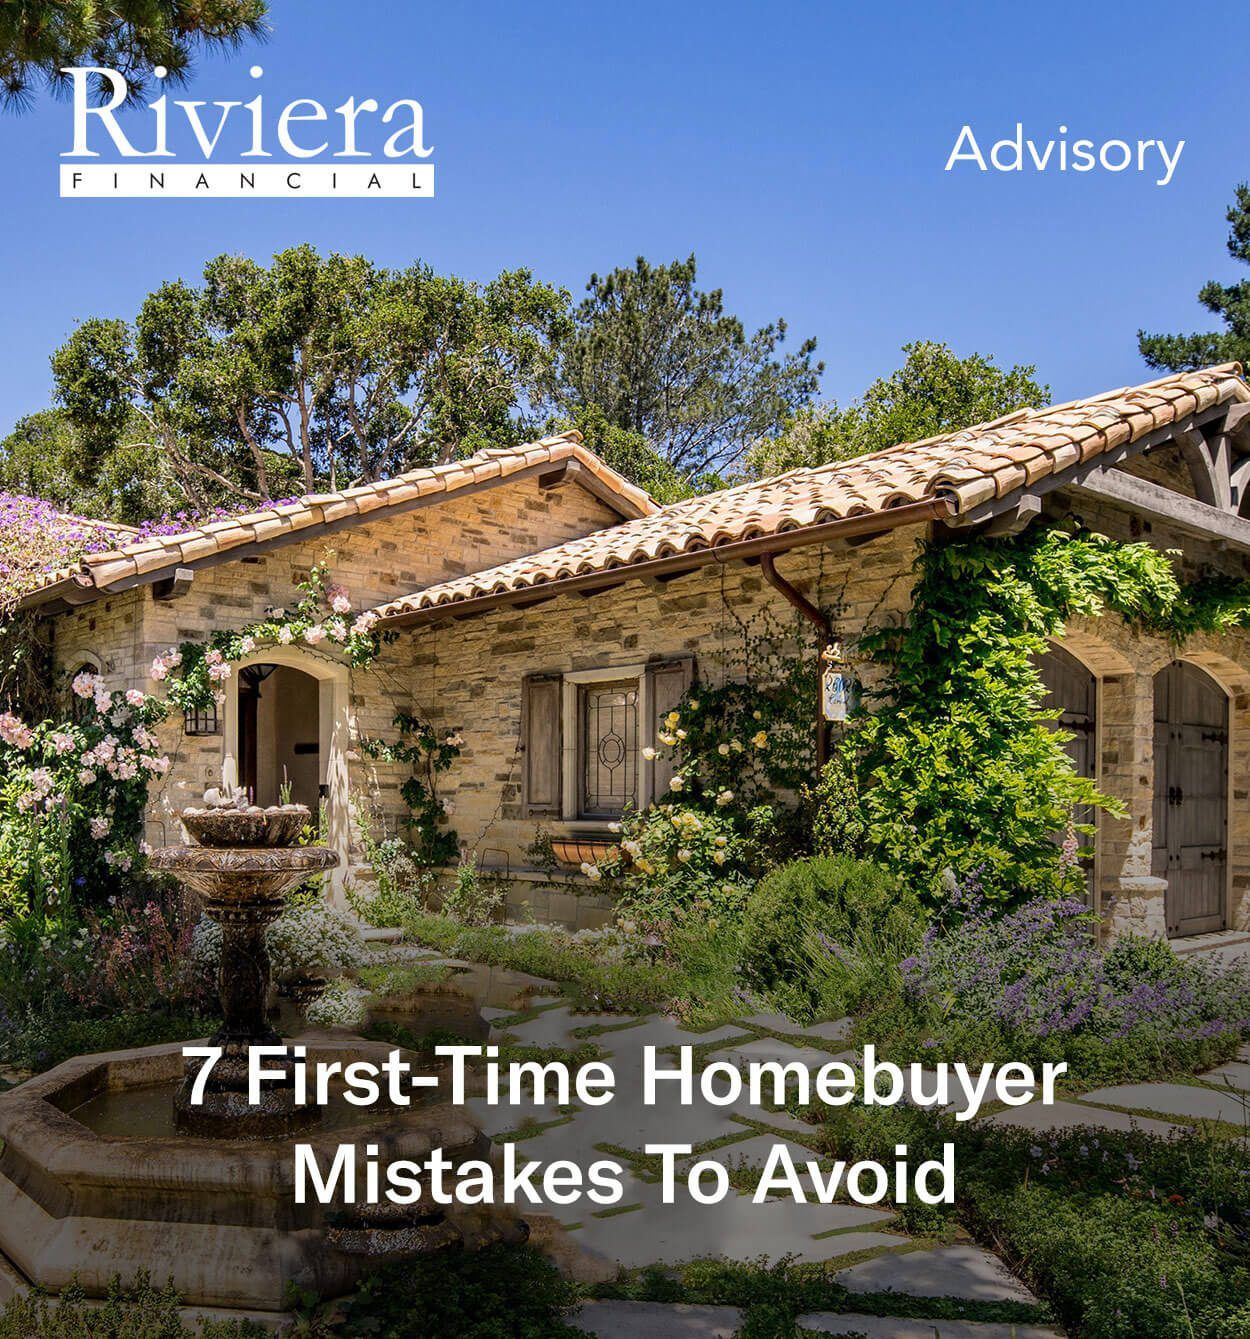 7 First-Time Homebuyer Mistakes to Avoid